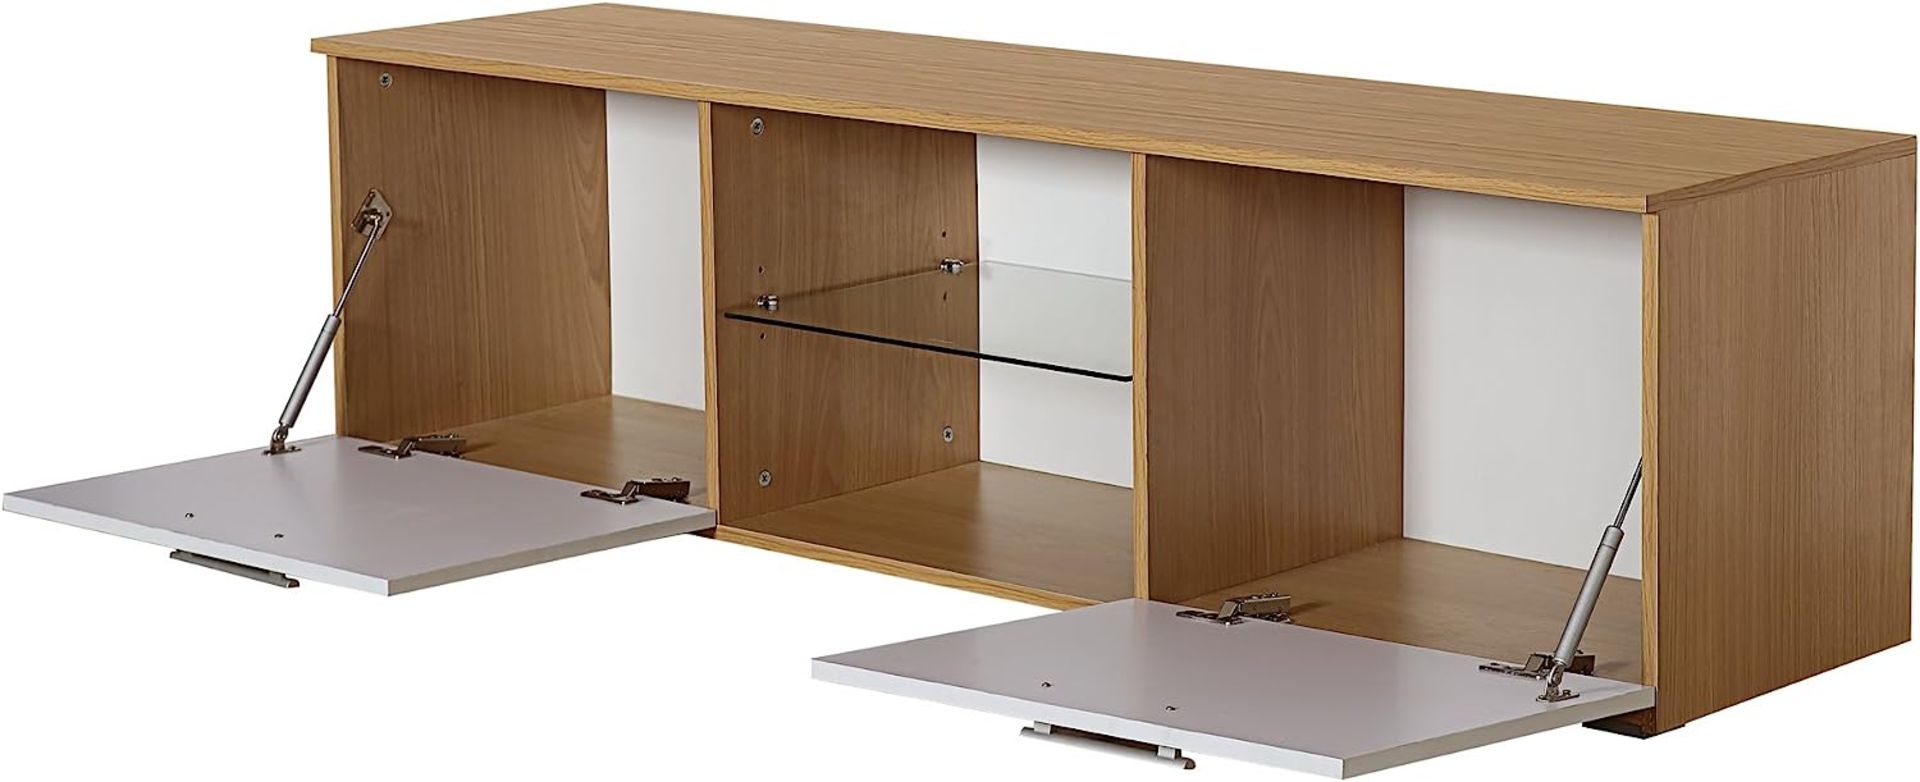 HARMIN MODERN 160CM TV STAND CABINET UNIT WITH HIGH GLOSS DOORS (WHITE ON OAK) - Image 5 of 9